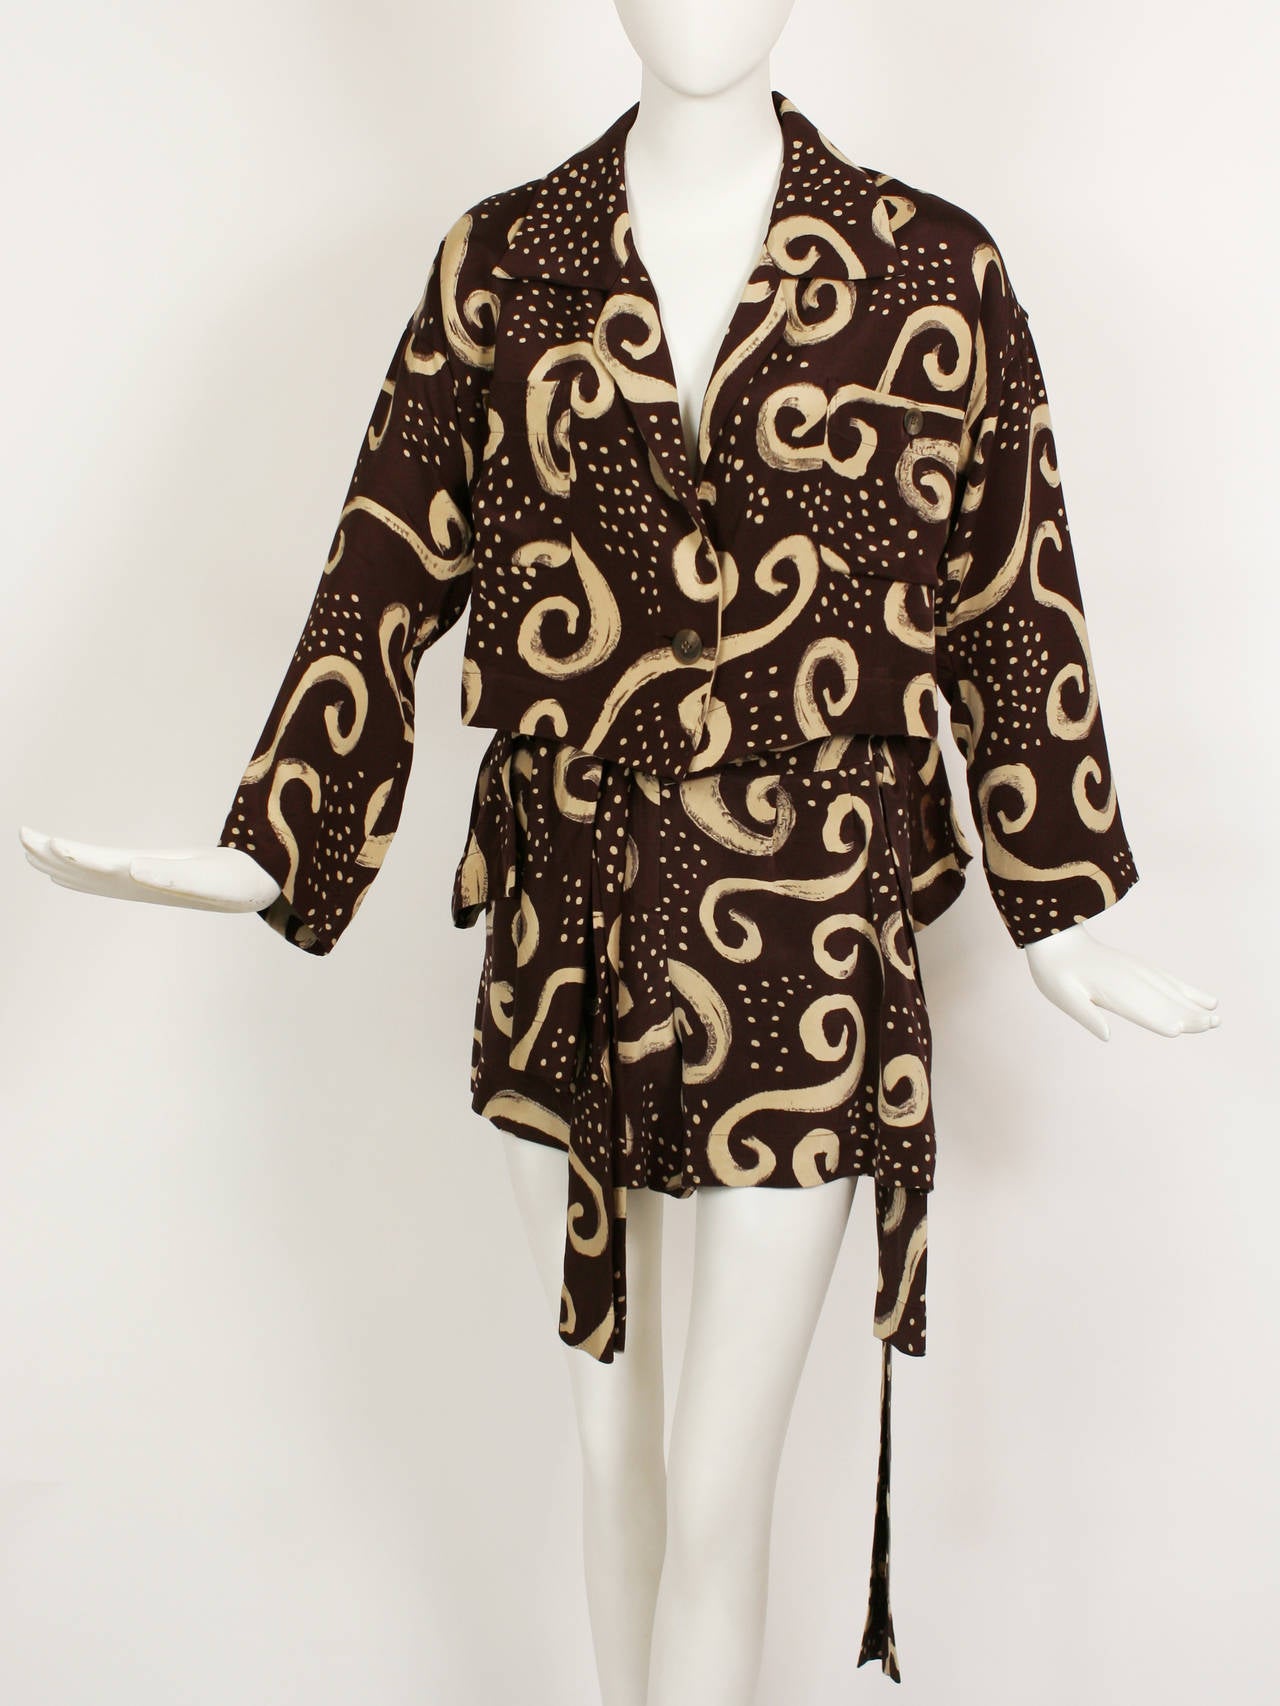 Issey Miyake Silk Print Ensemble with Shorts and Top In Excellent Condition For Sale In New York, NY